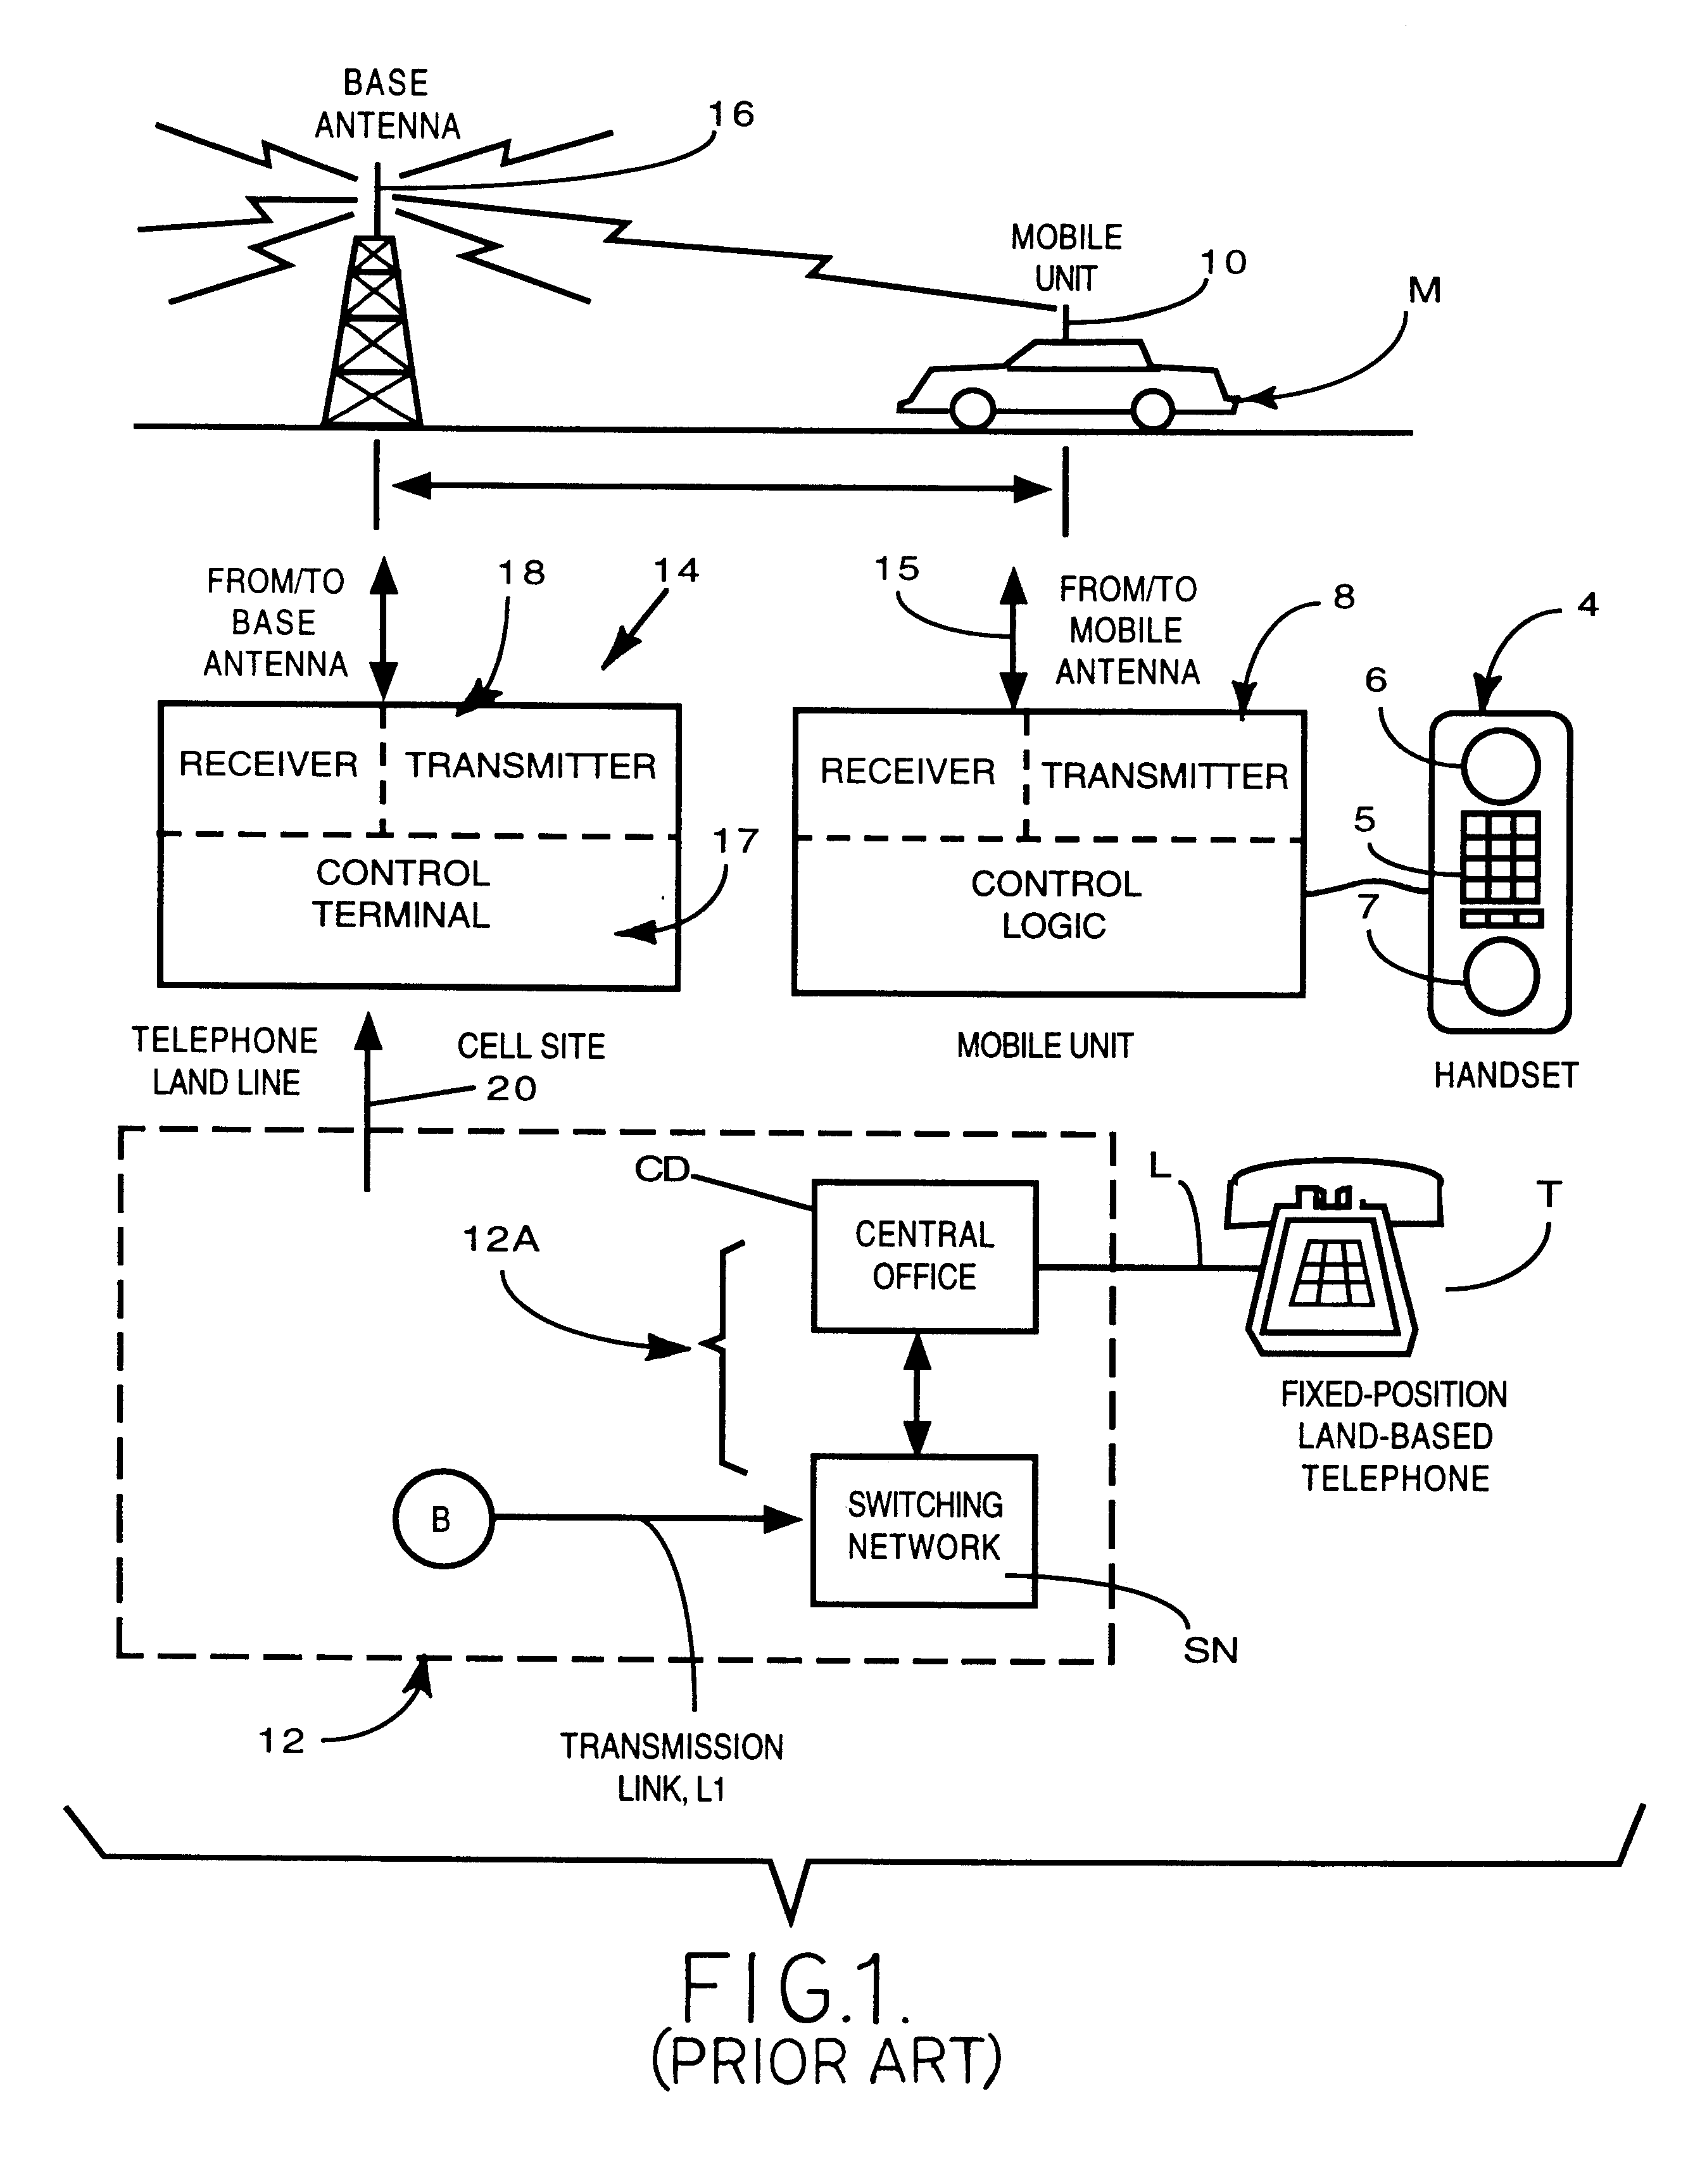 Cellular telephone system that uses position of a mobile unit to make call management decisions